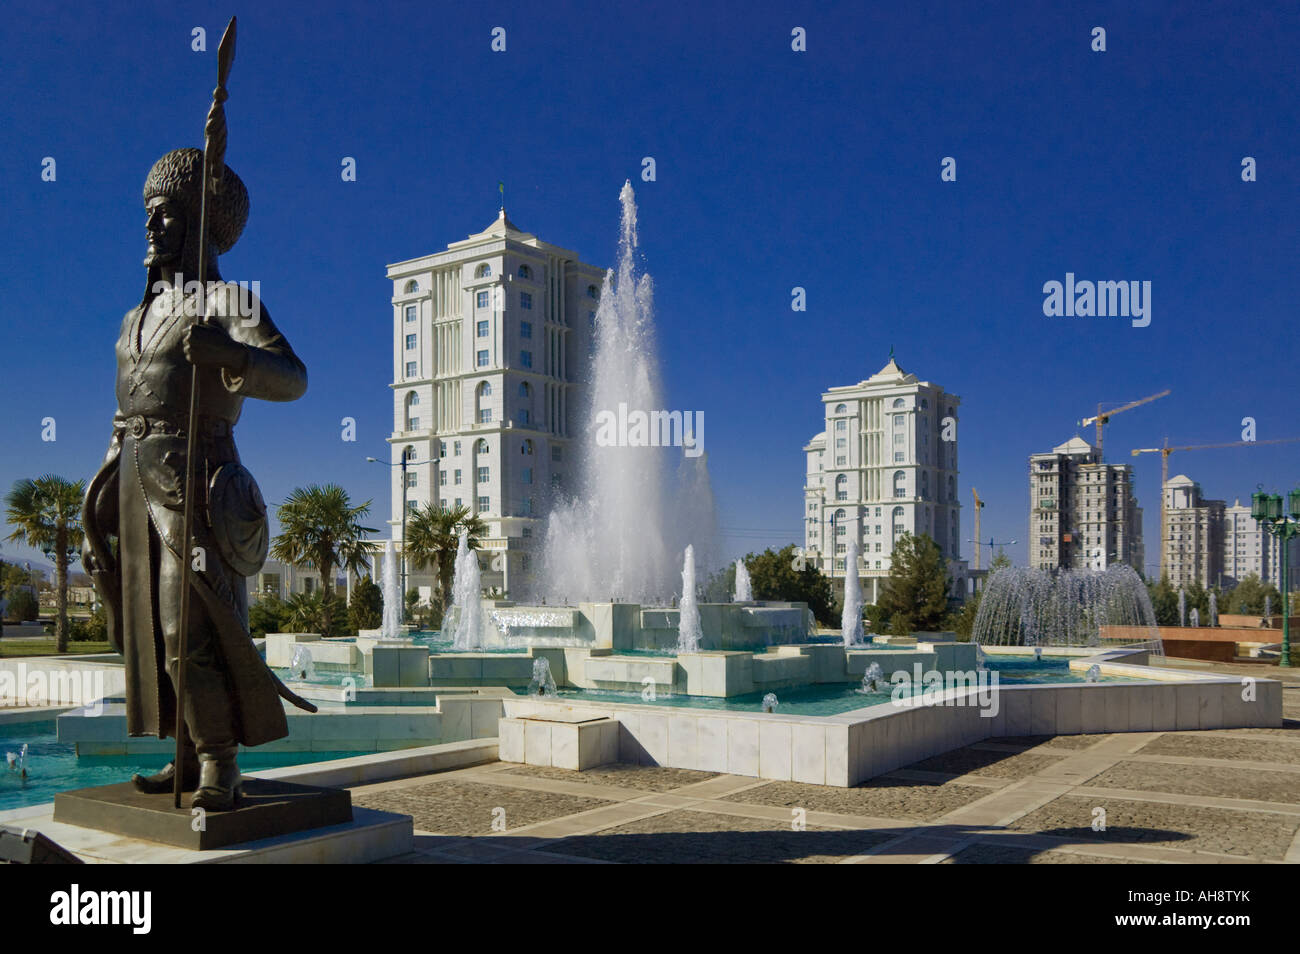 Statue of nomad warrior in recreation zone of new district of Ashgabat, Turkmenistan Stock Photo